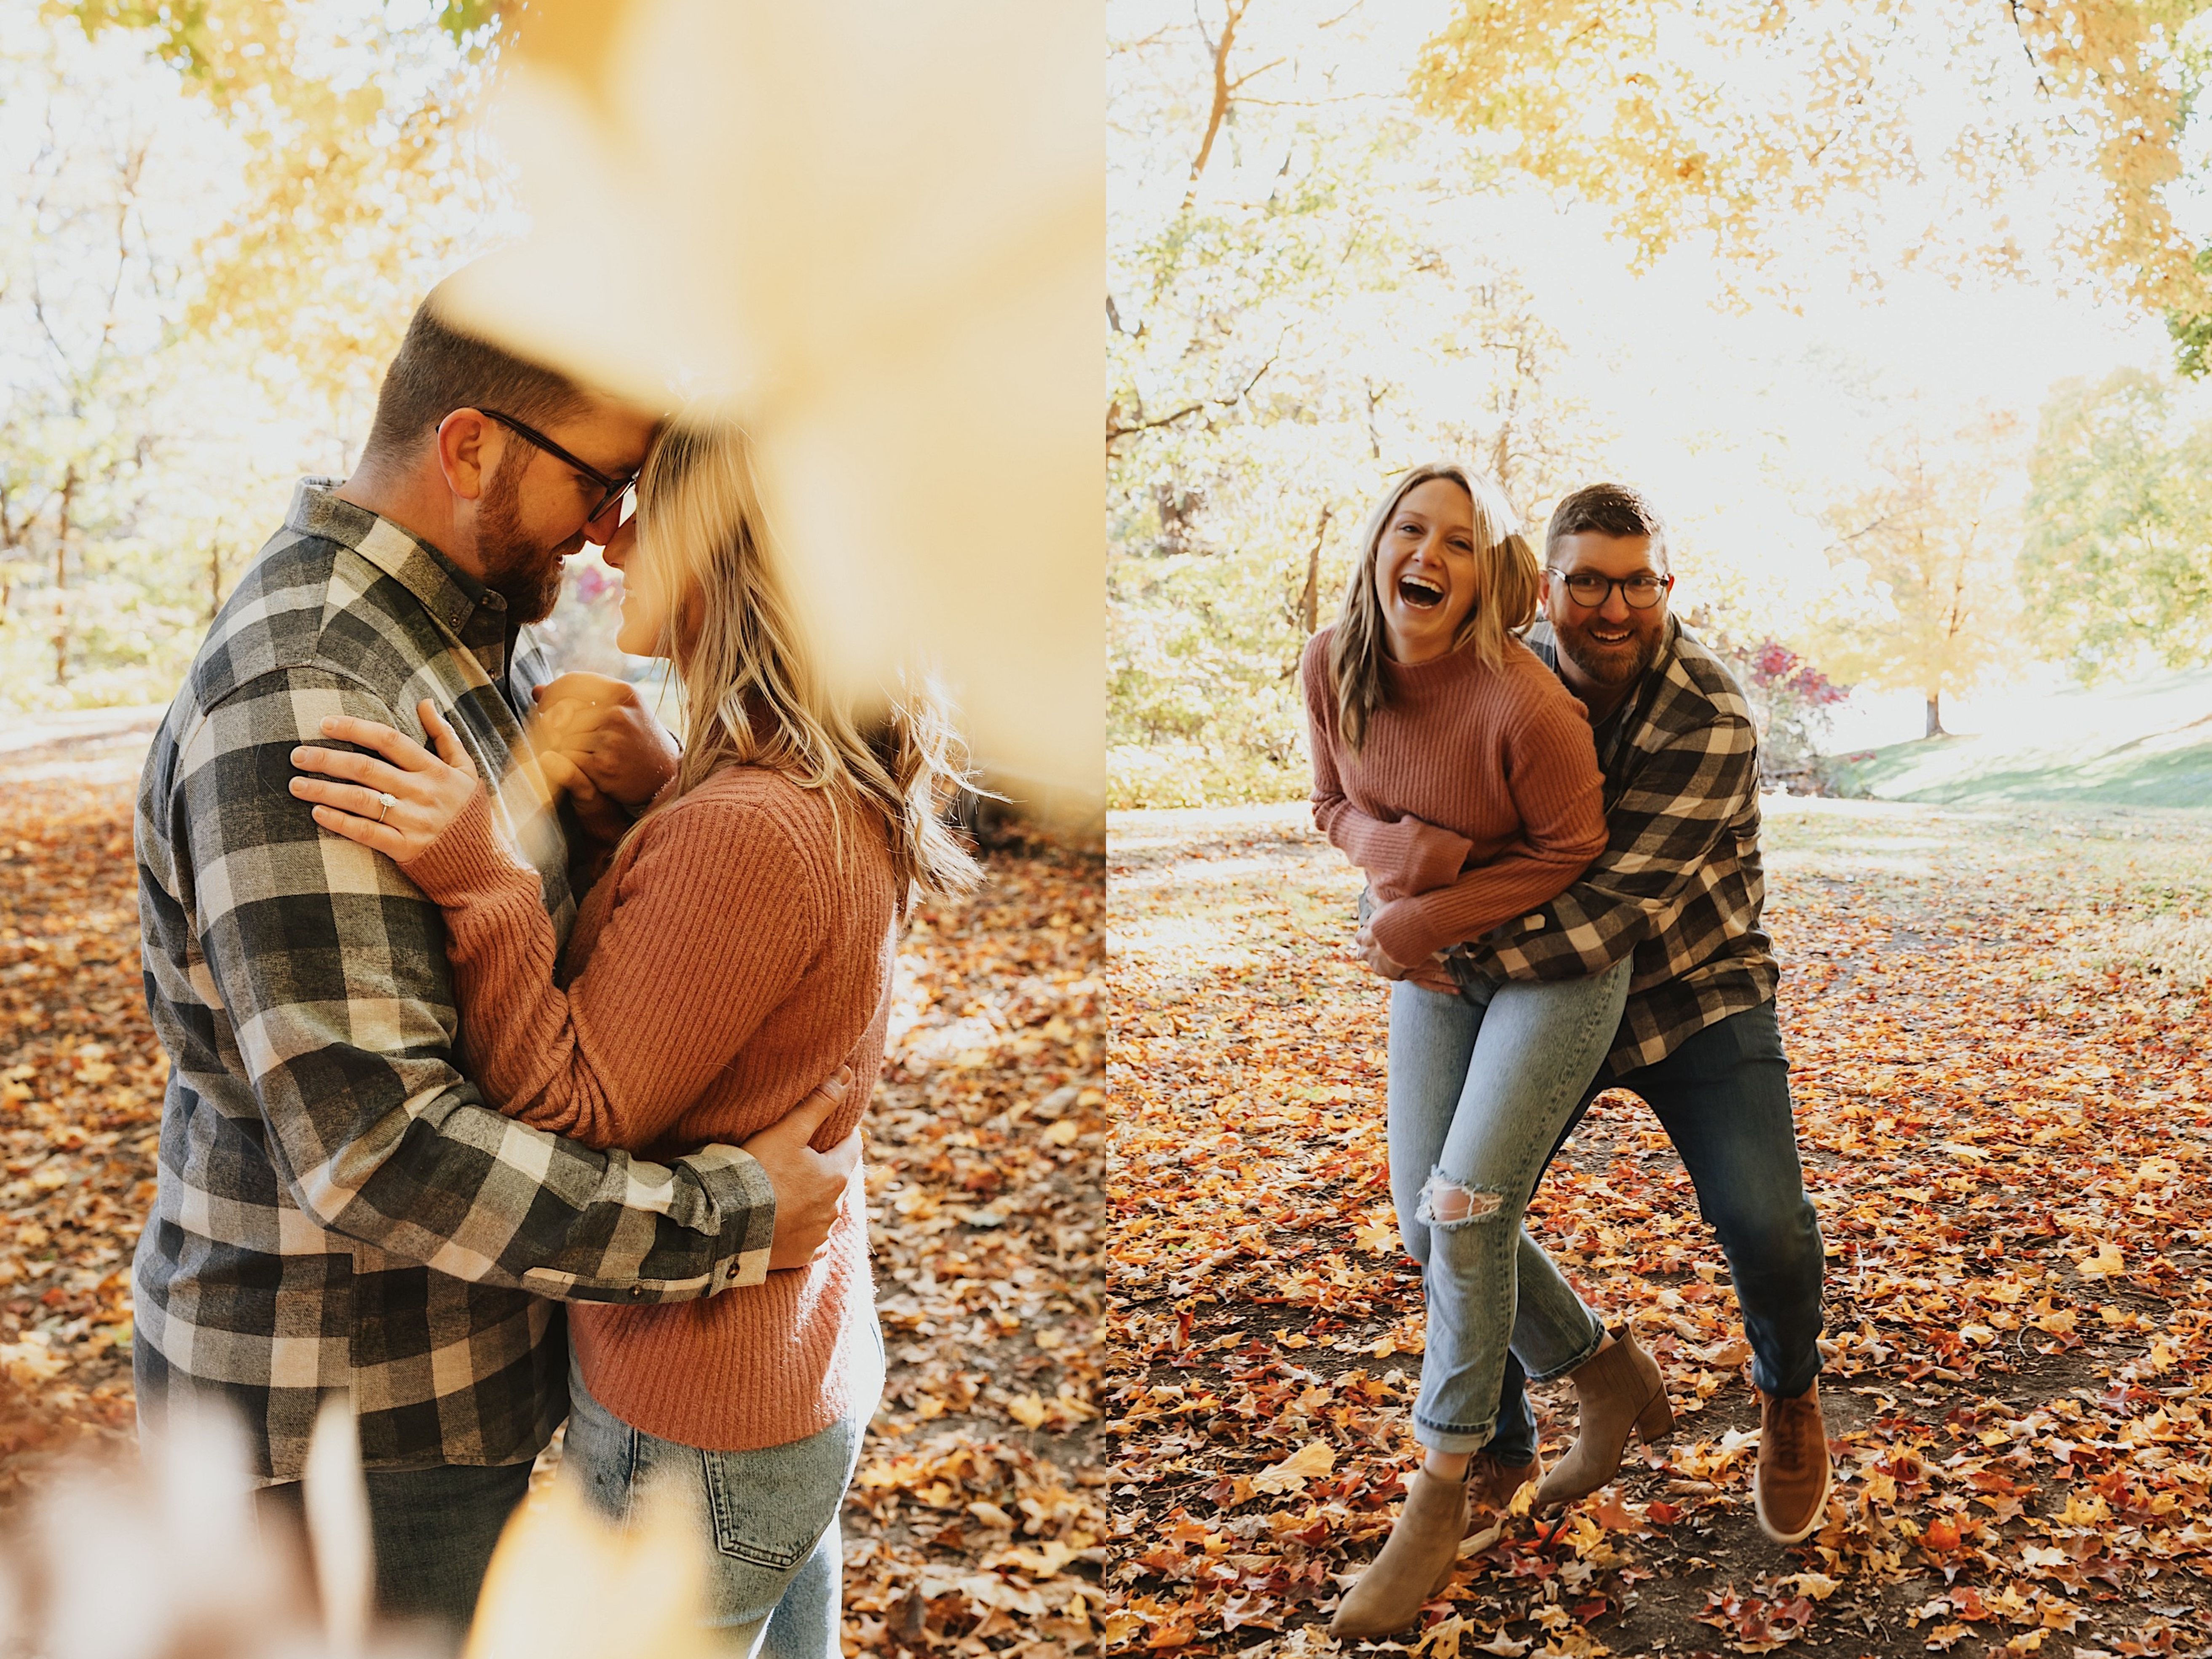 2 photos side by side, the left is of a couple embracing with leaves on the ground around them and leaves falling in the foreground, the right is of the same couple still surrounded by leaves but the woman is laughing as the man hugs her from behind while smiling at the camera